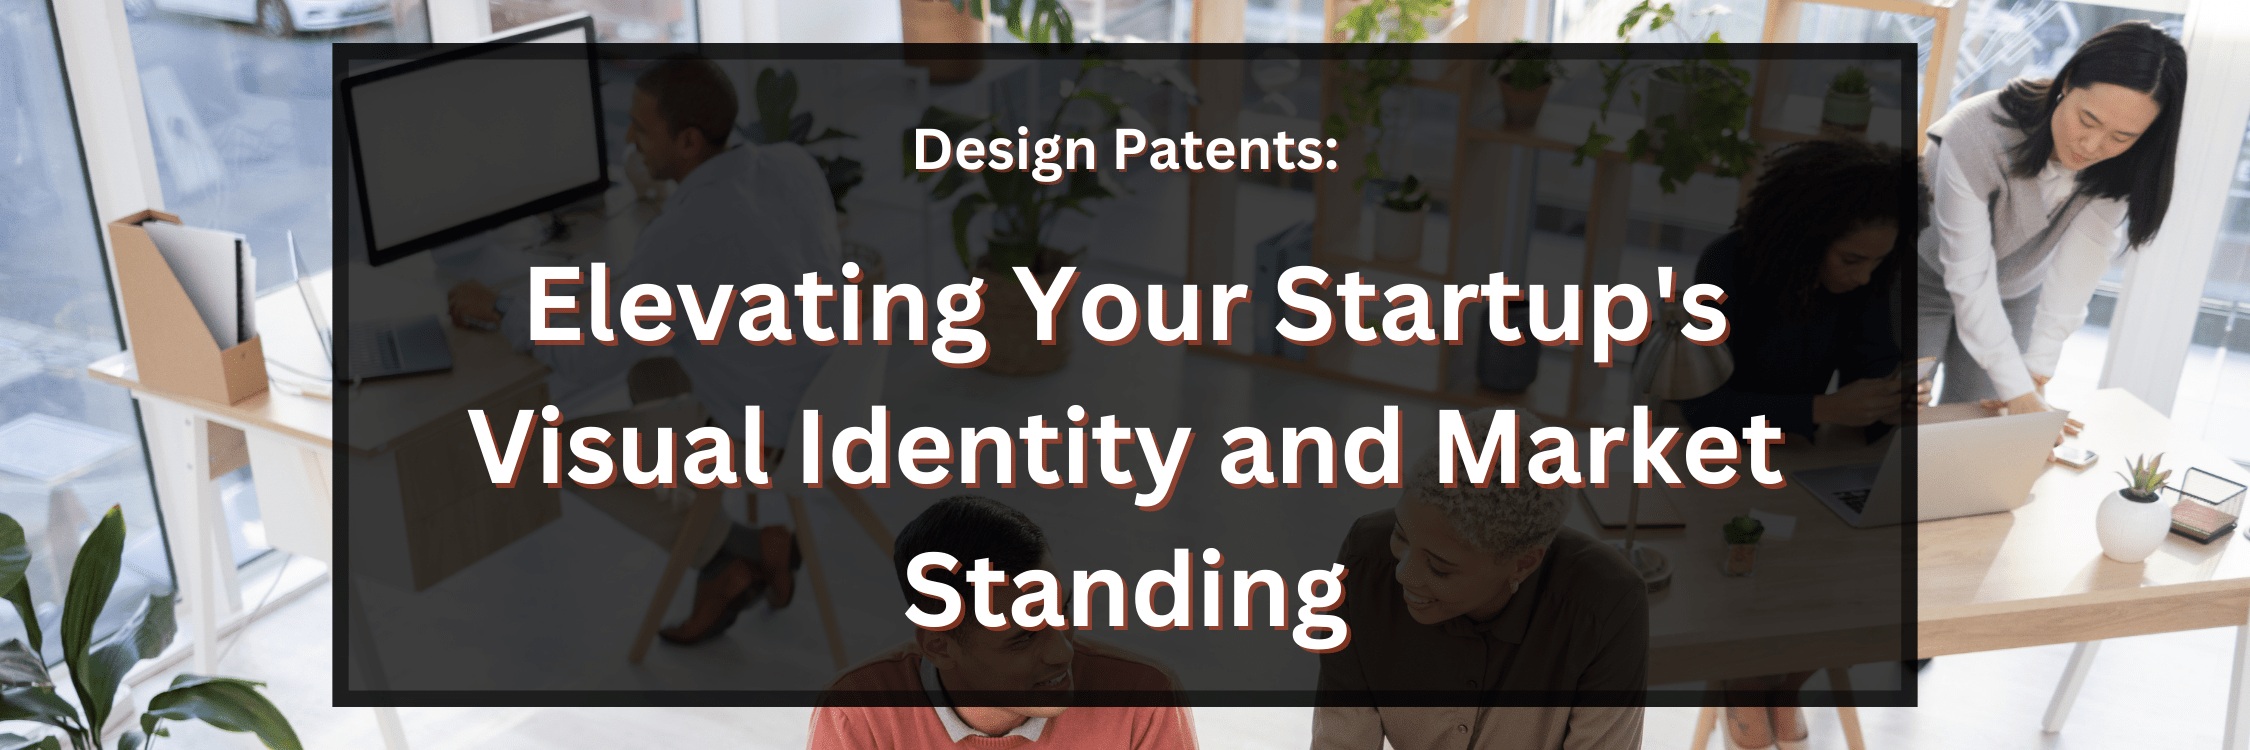 Design Patents: Elevating Your Startup Visual Identity and Market Standing